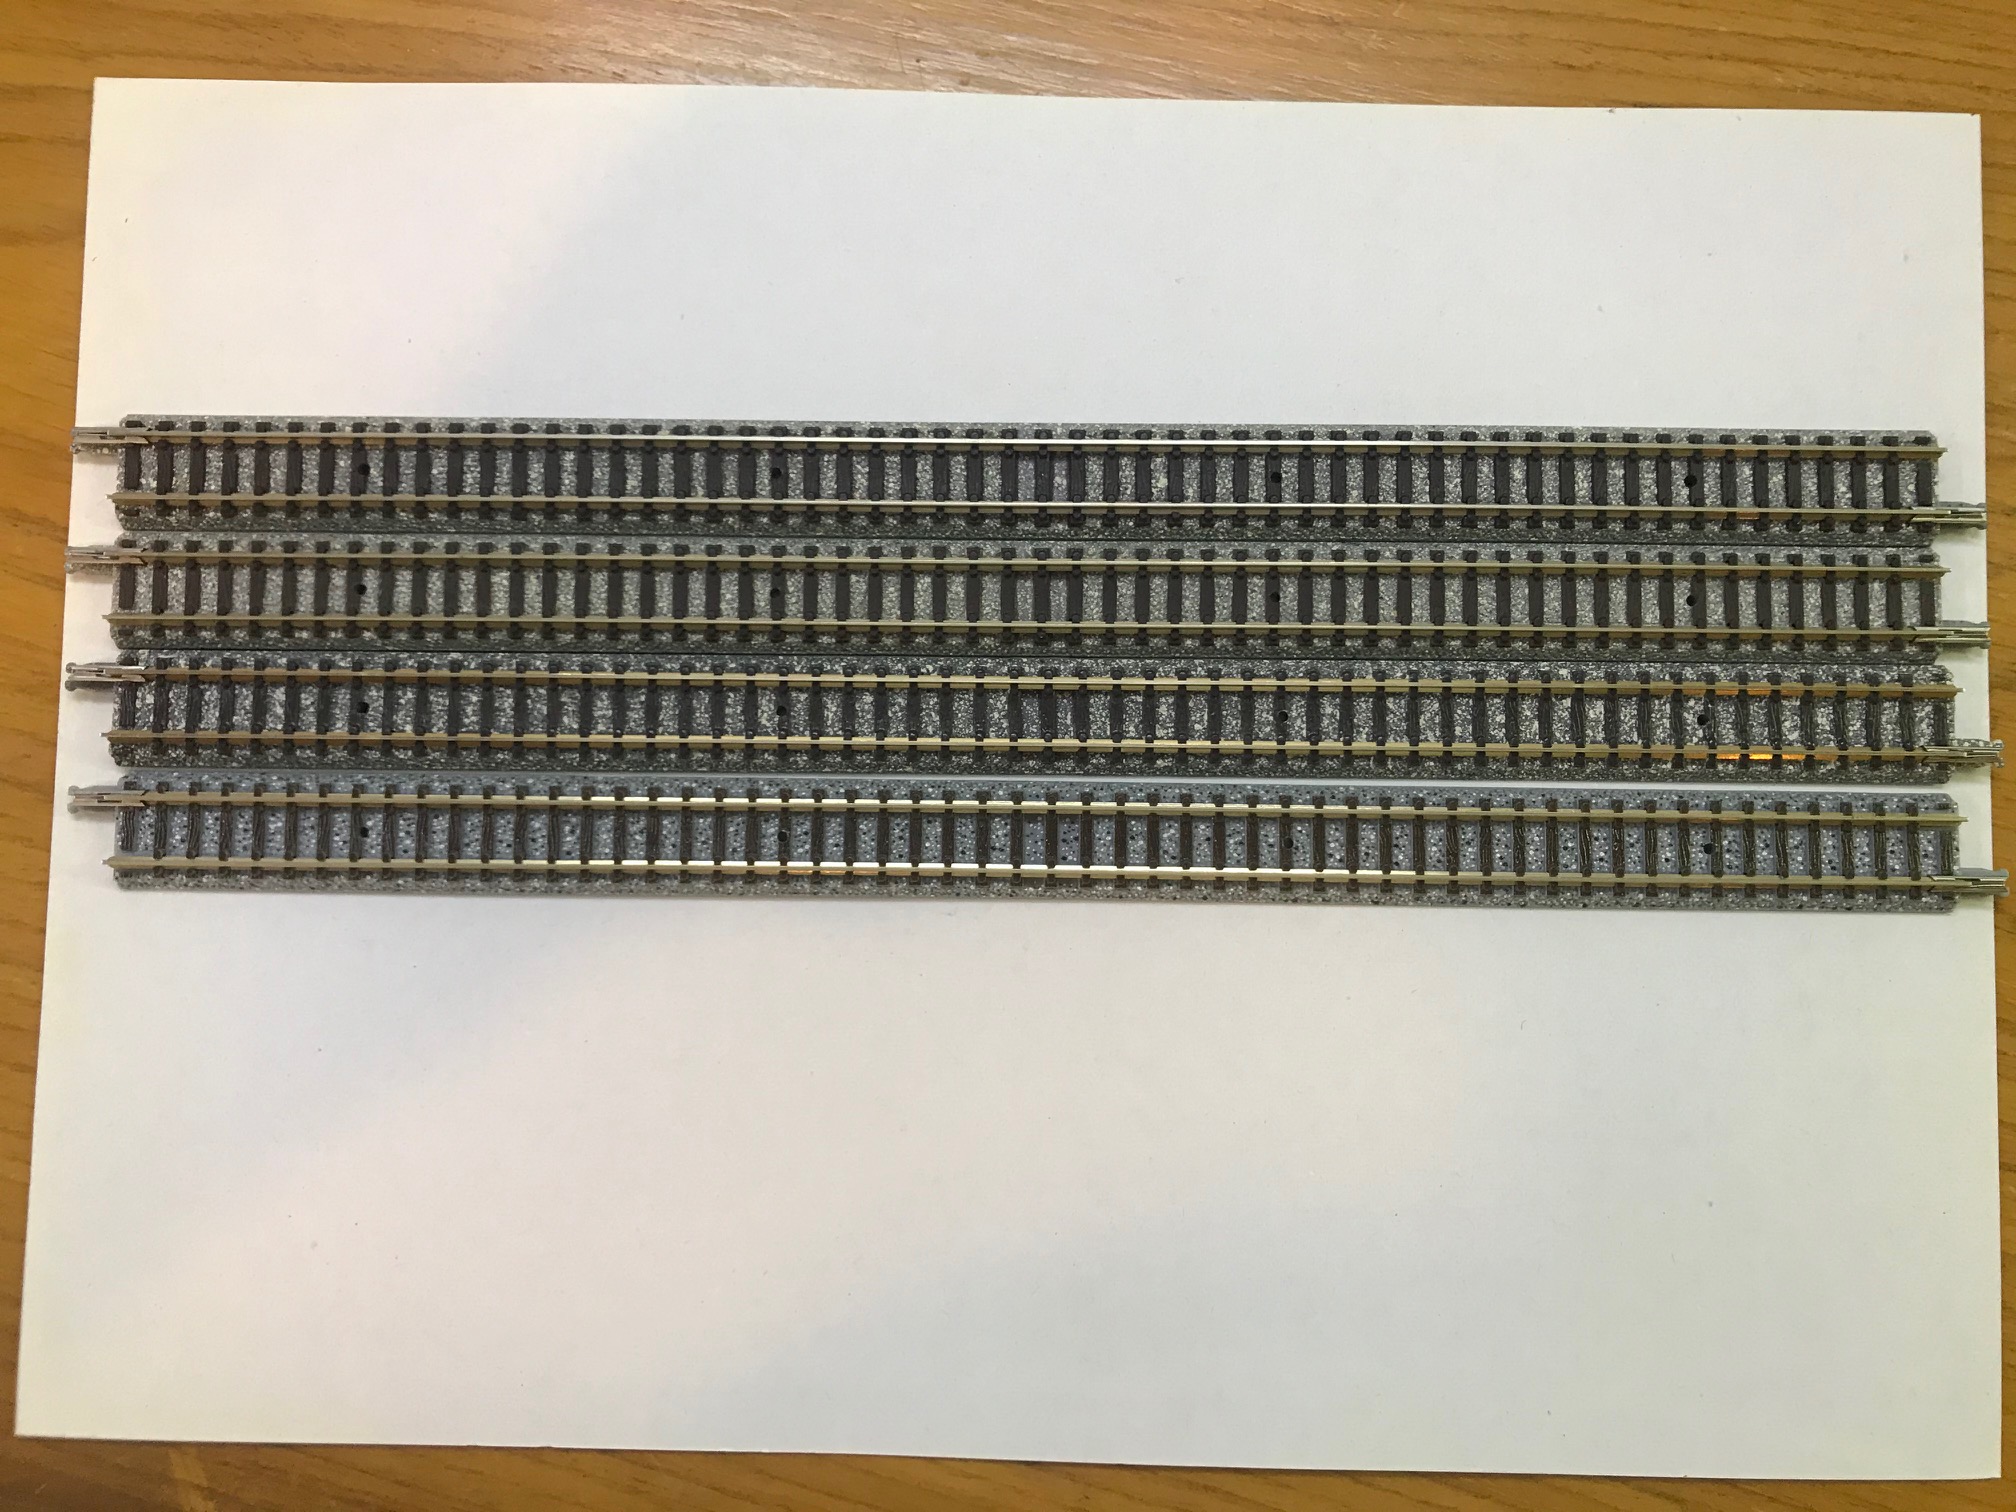 Tomix 1092 280mm Straight Grey Track S280 (4 pieces) (N scale)